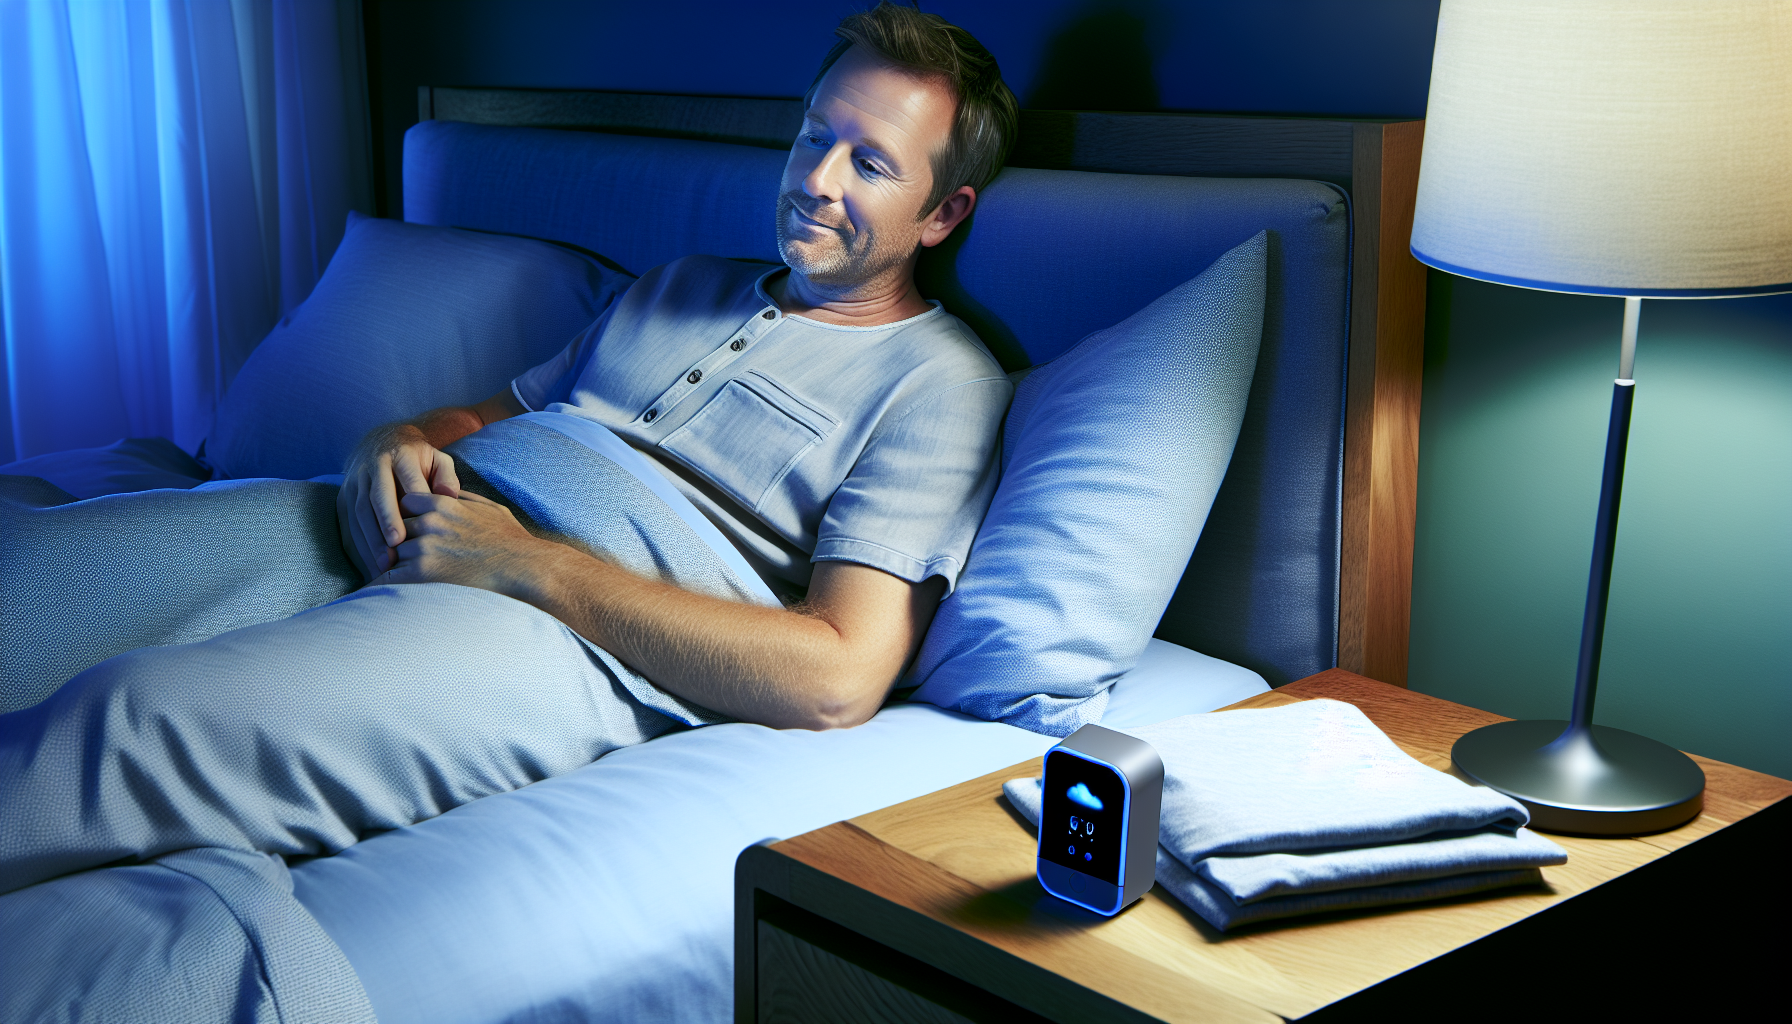 A person using a sleep tracking device at night